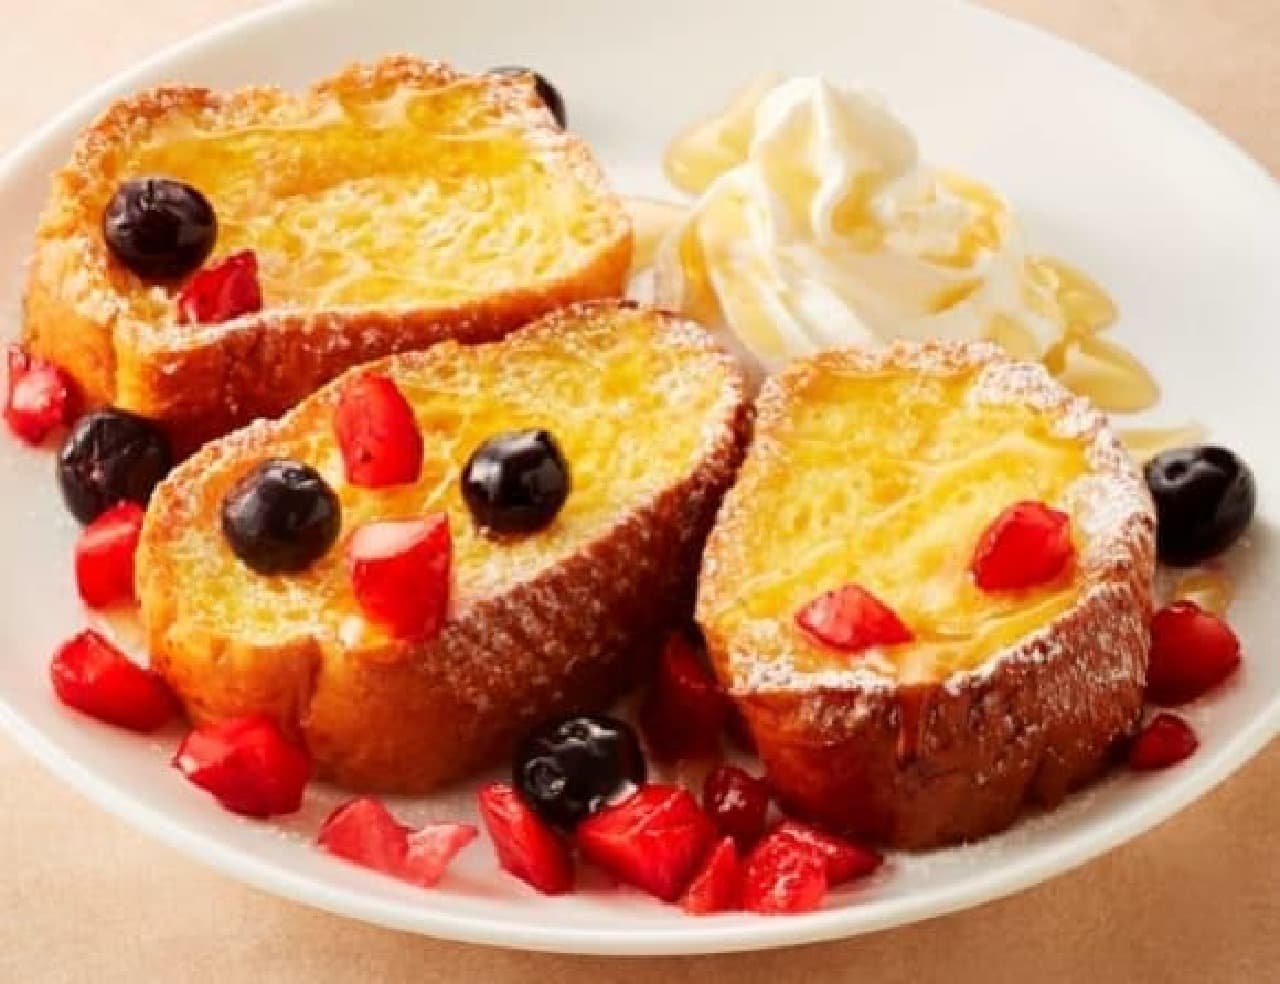 Have a good time with a new French toast ... (The photo is T's French toast honey double berry)